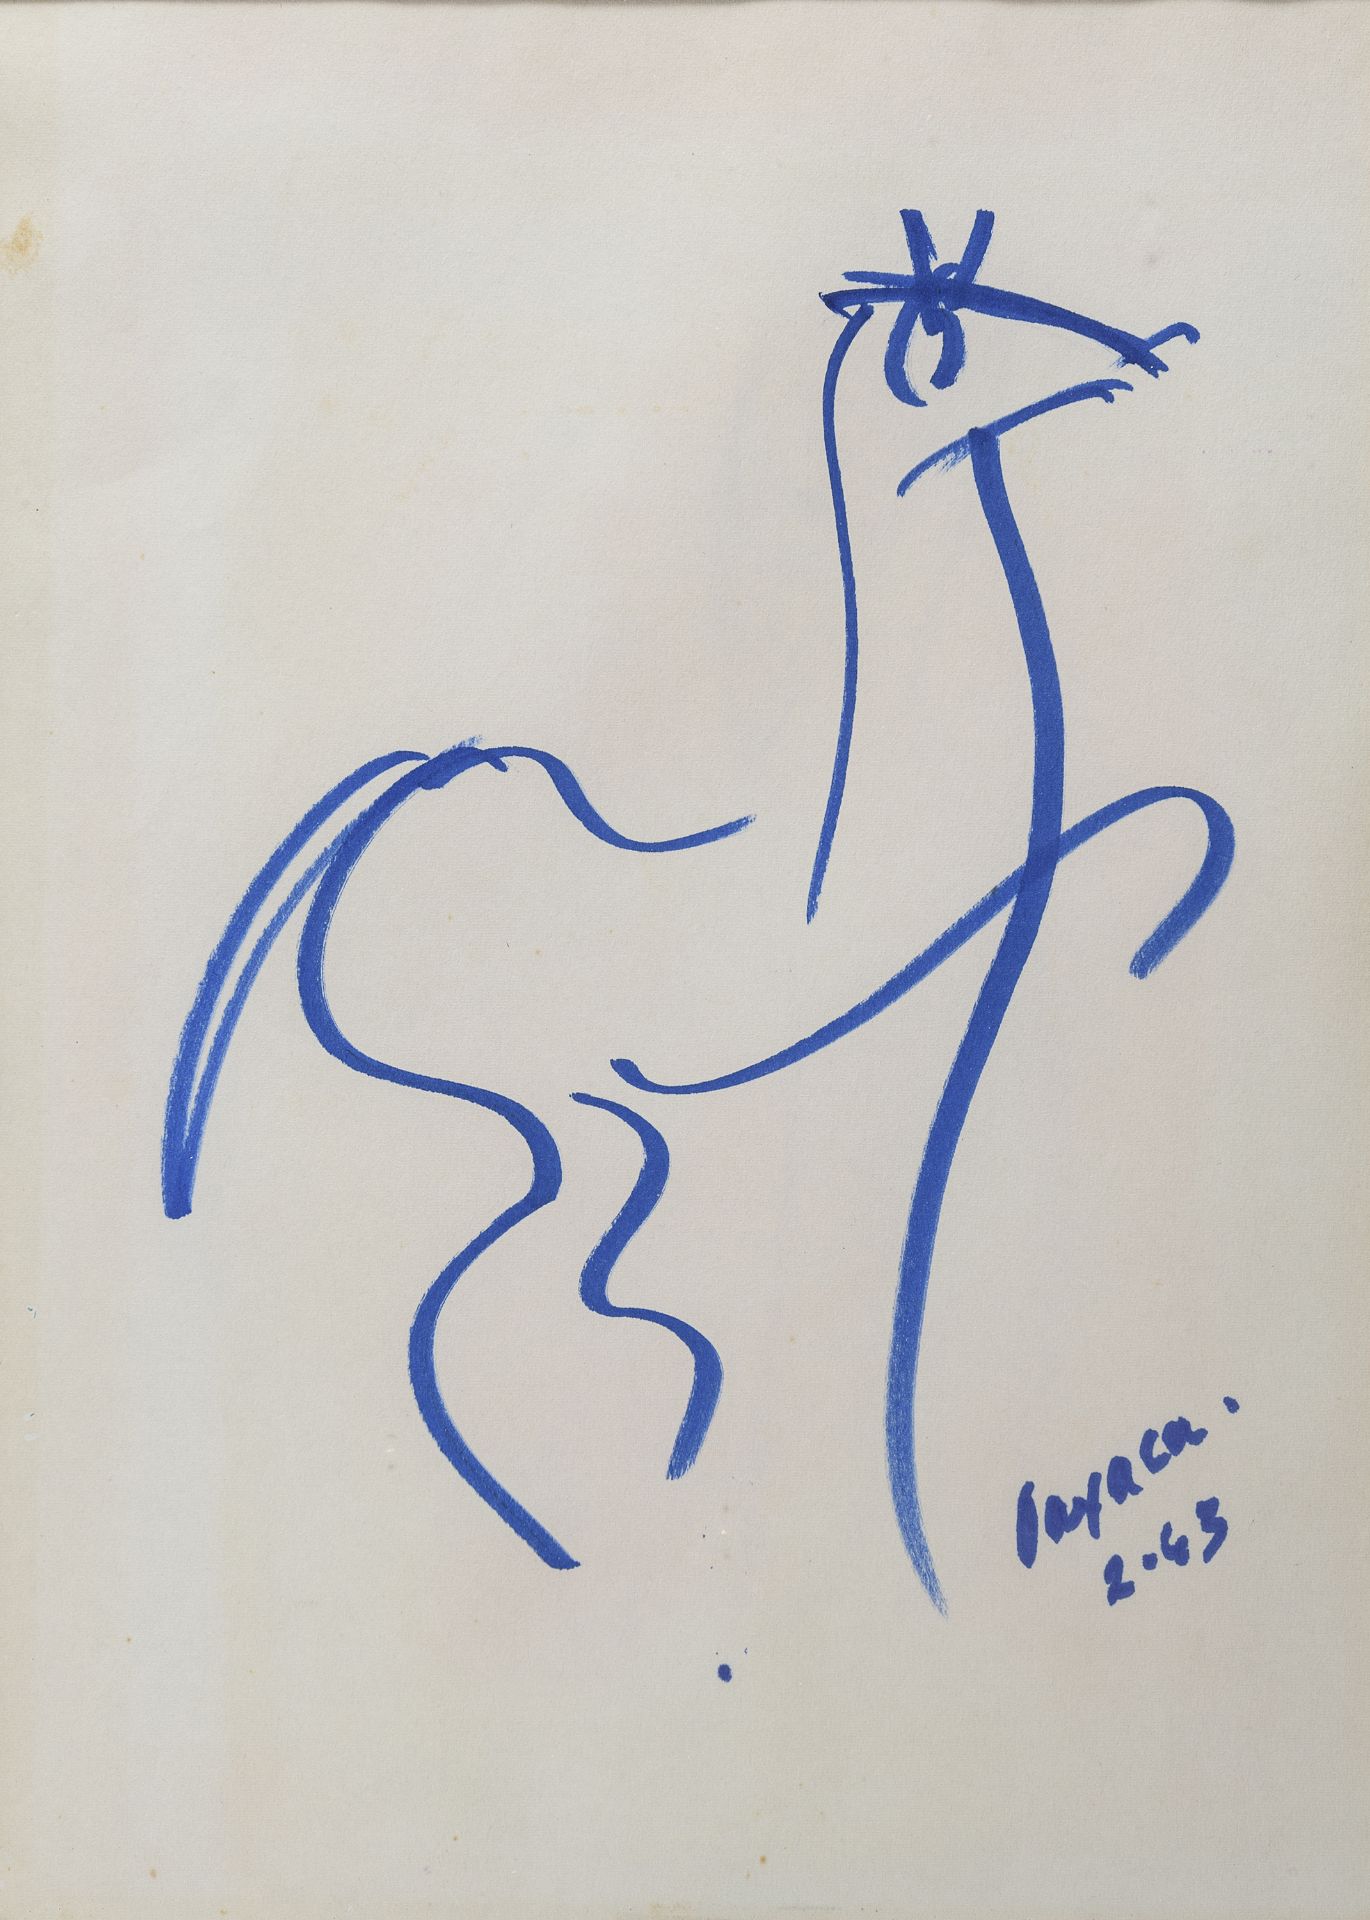 TWO FELT PEN NUDES BY ANTHONY QUINN 1963